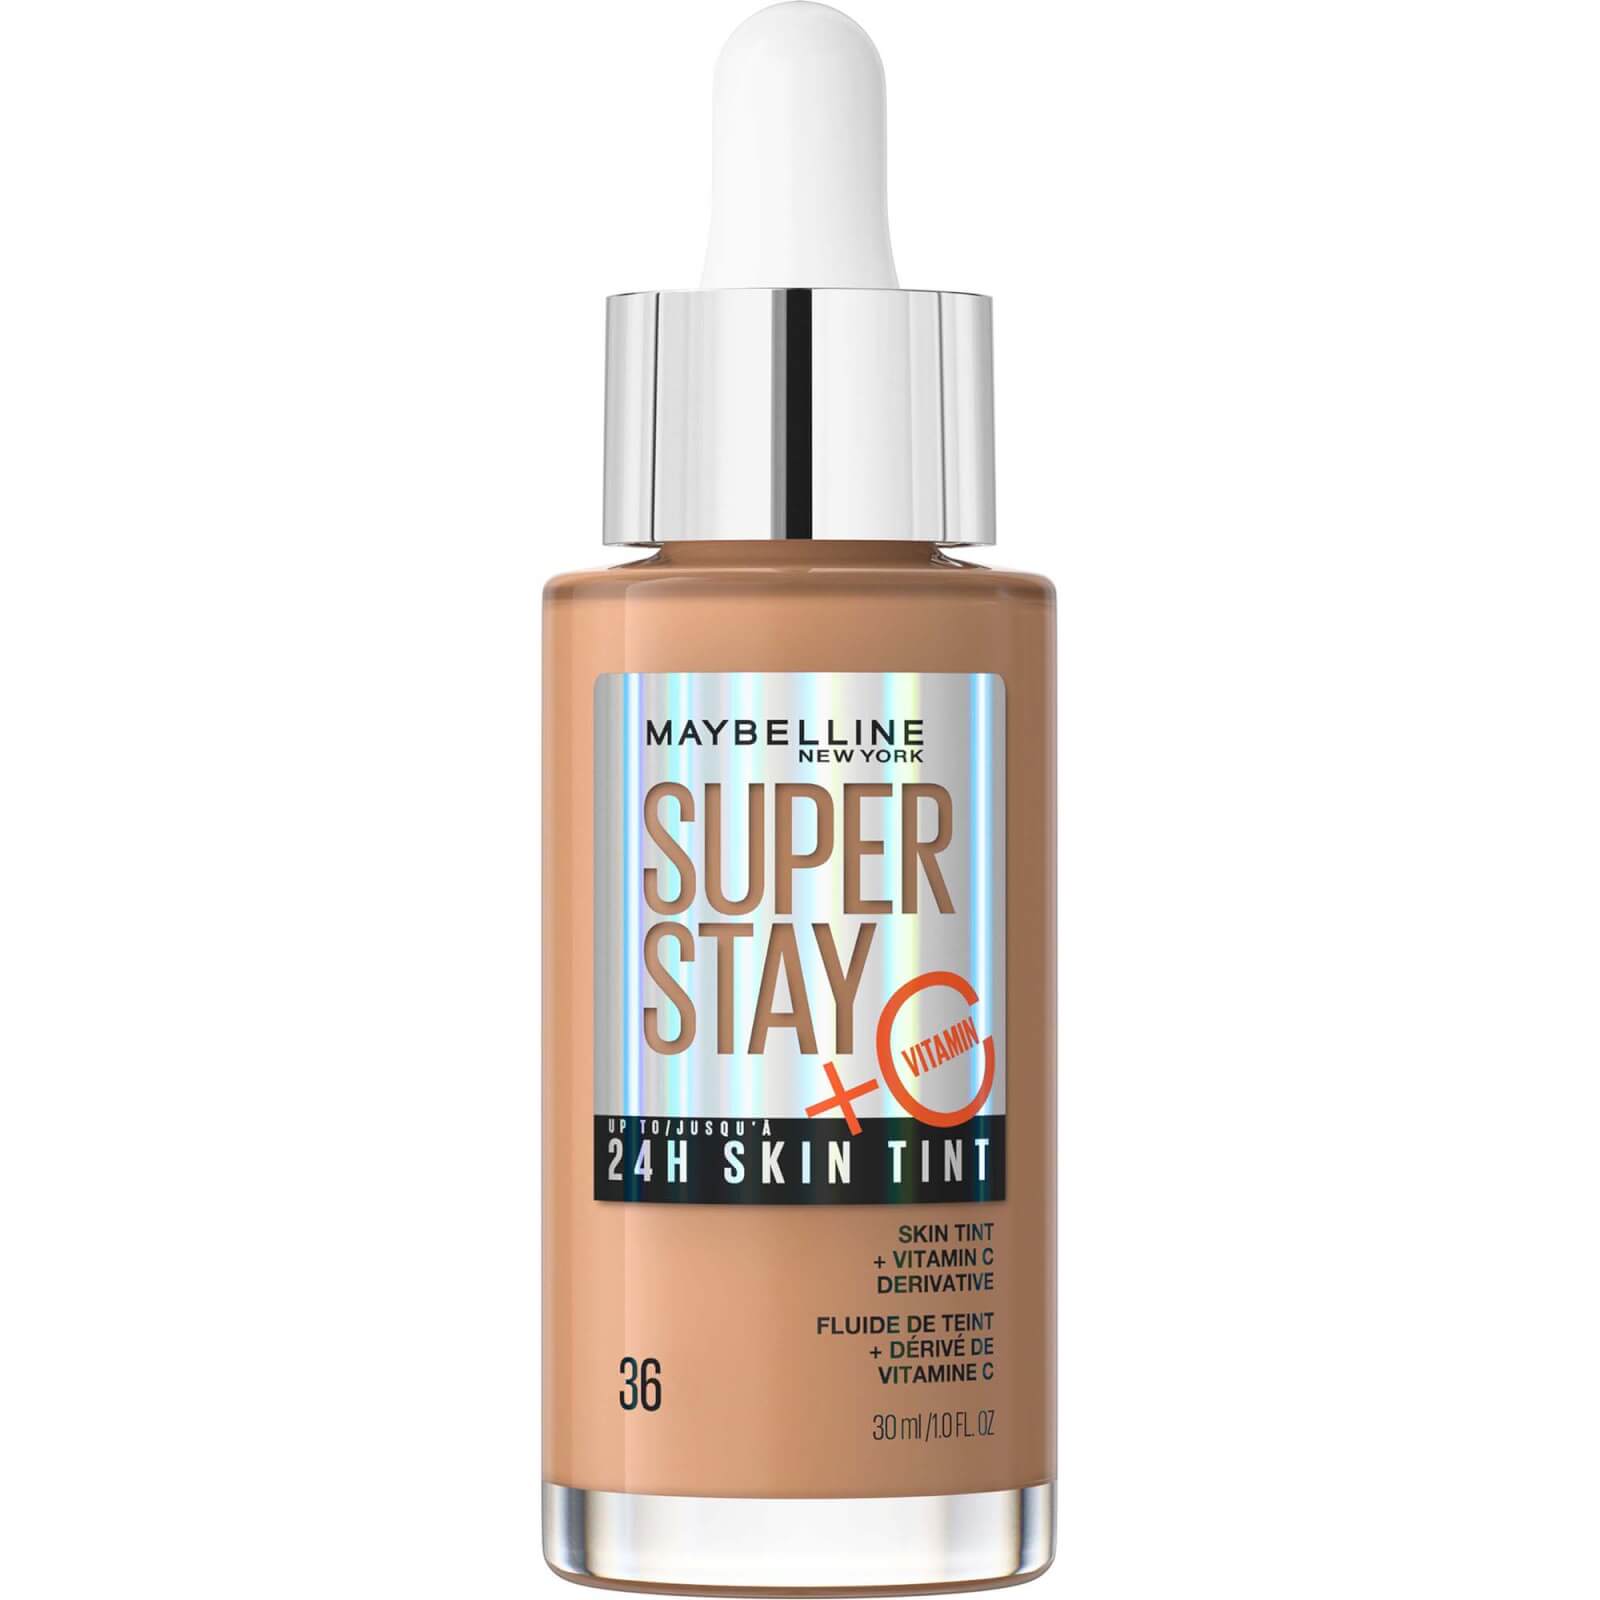 Maybelline Super Stay Up To 24h Skin Tint Foundation + Vitamin C 30ml (various Shades) - 36 In Brown